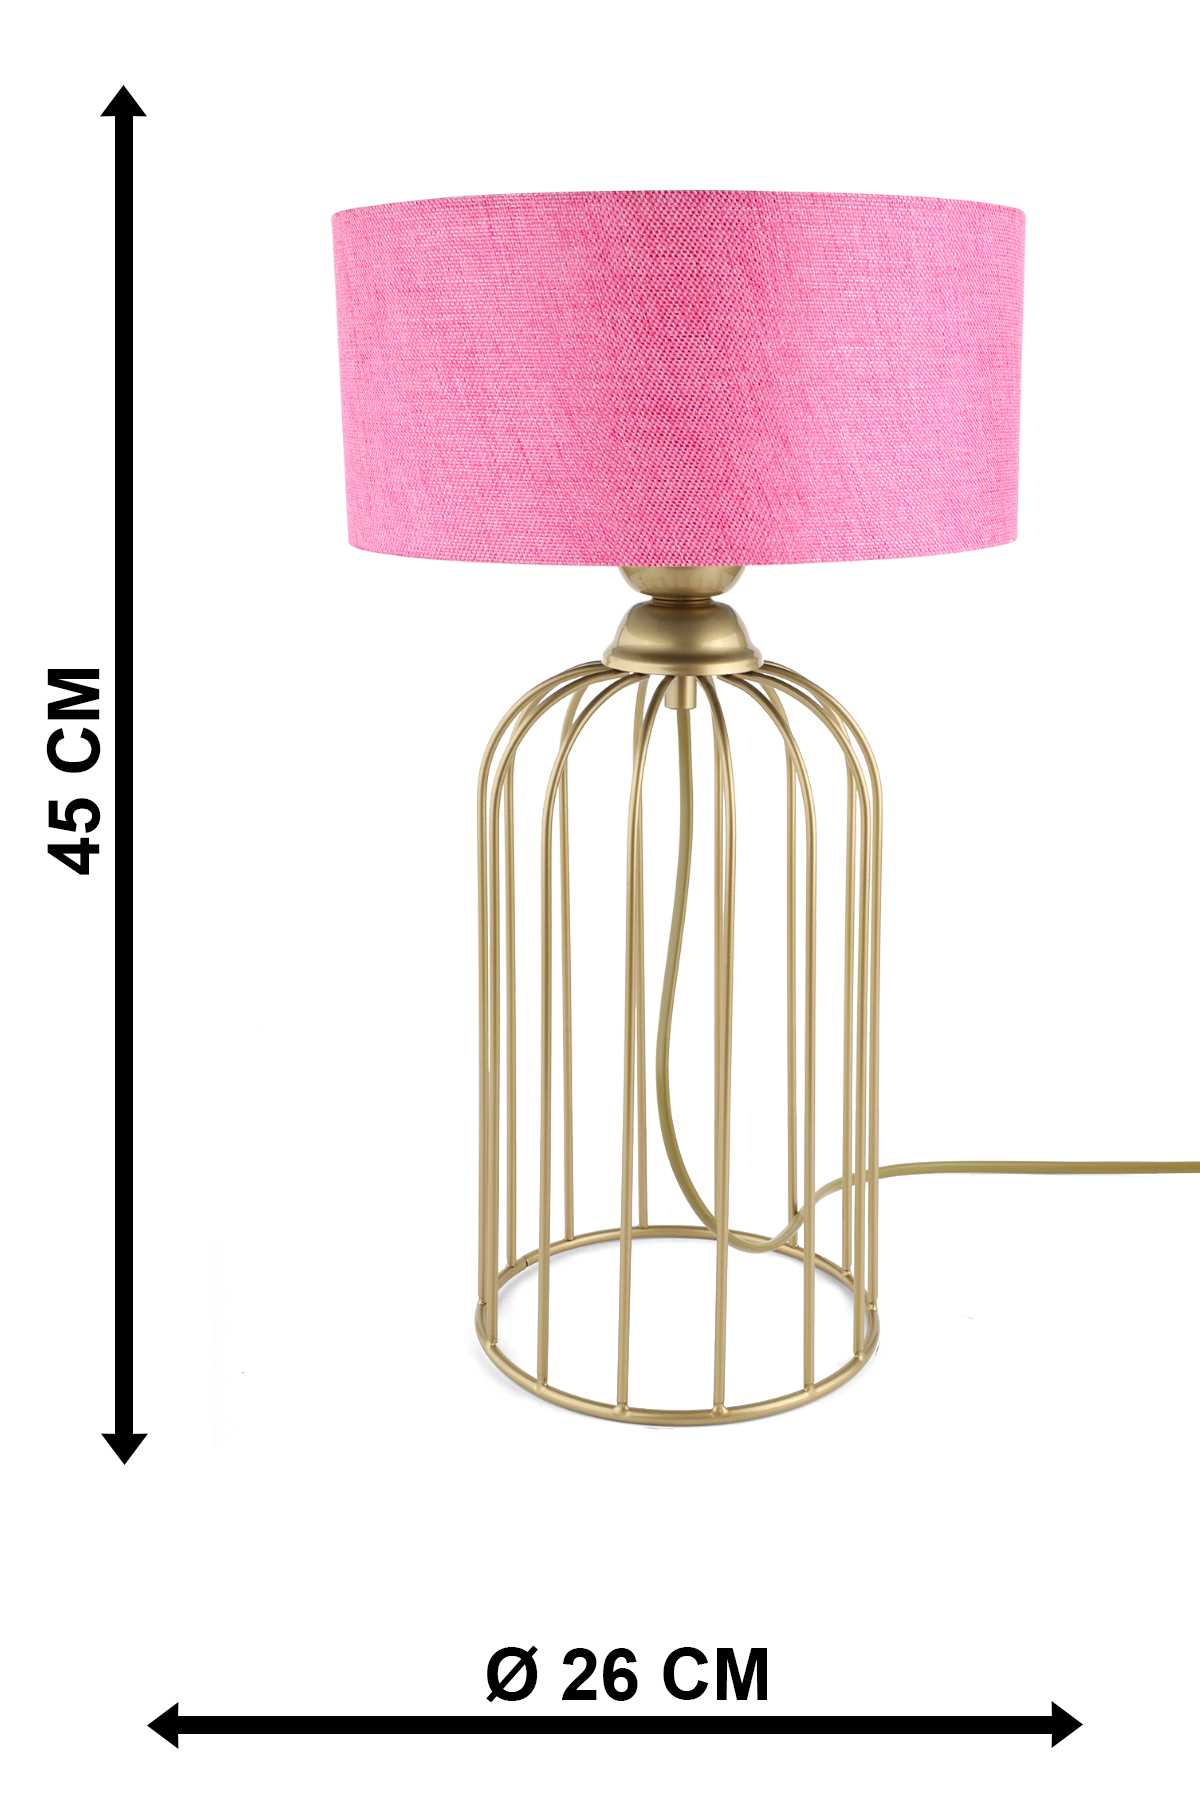 Tema Table lamp Antique,Pink